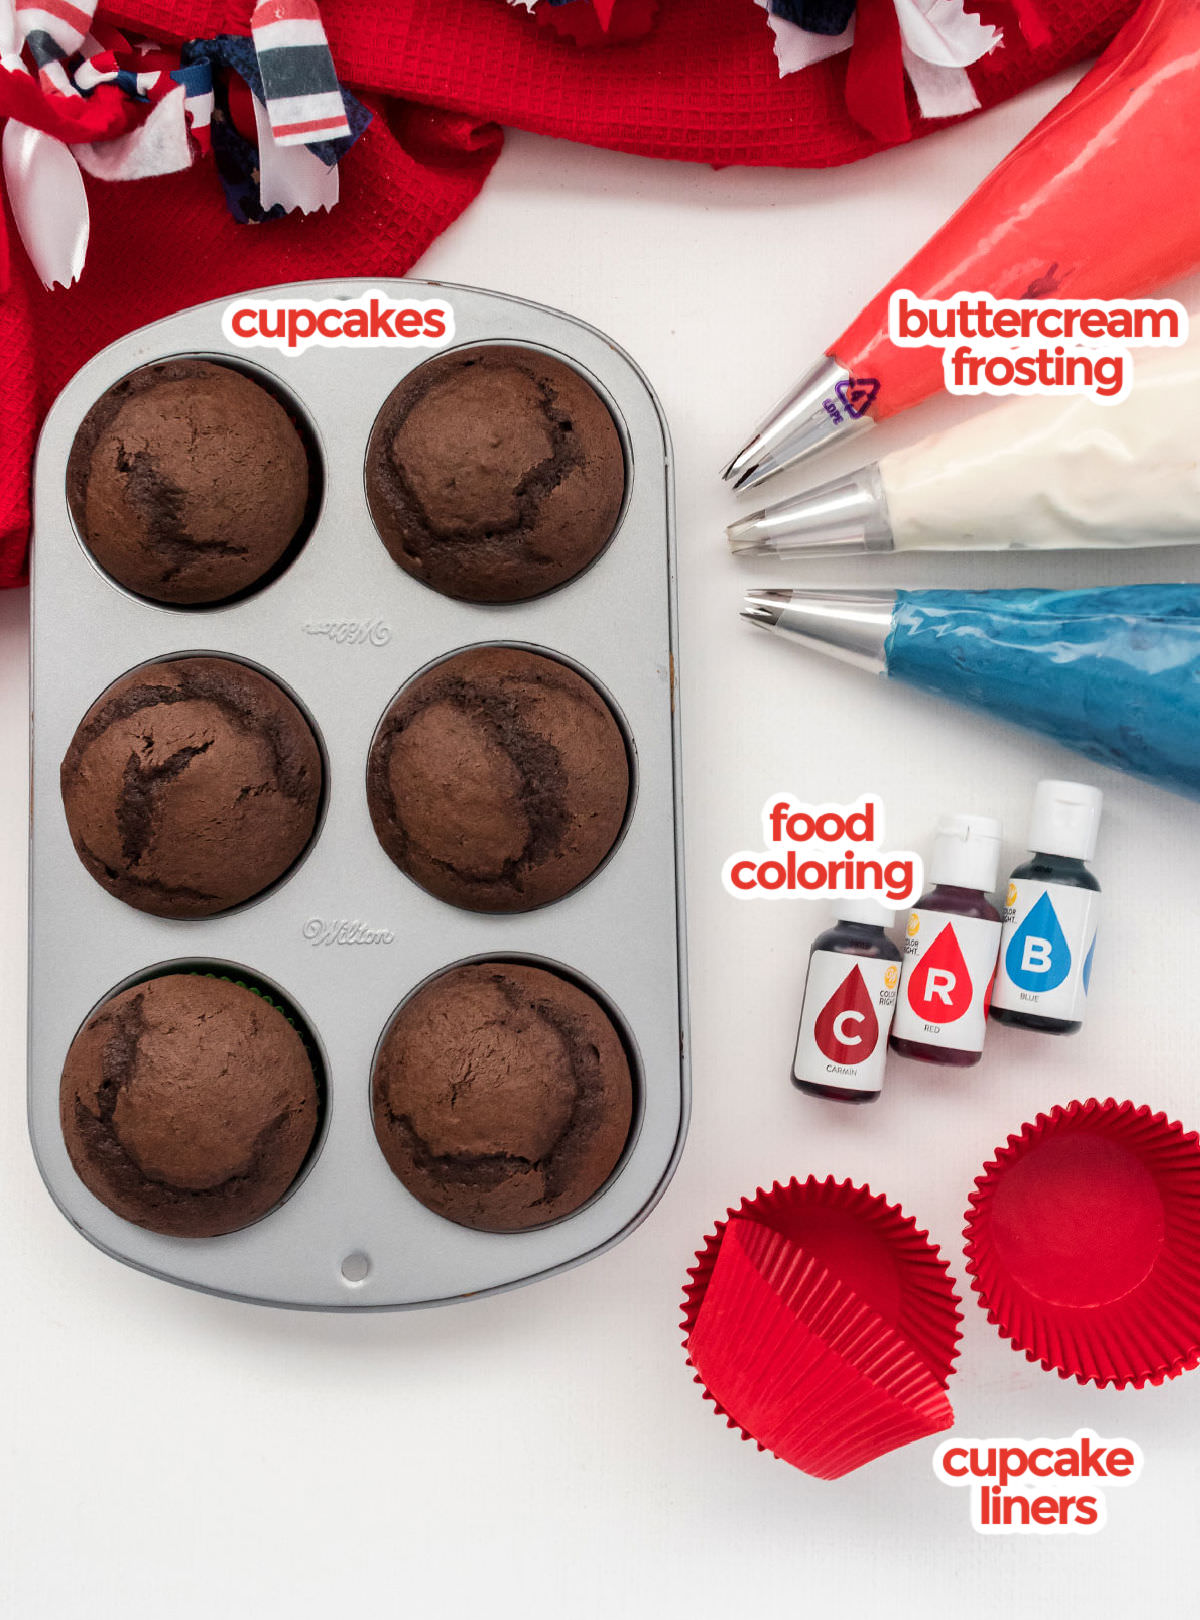 All the ingredients you will need to make Patriotic Swirl Cupcakes including chocolate cupcakes, buttercream frosting, blue and red food coloring and red cupcake liners.